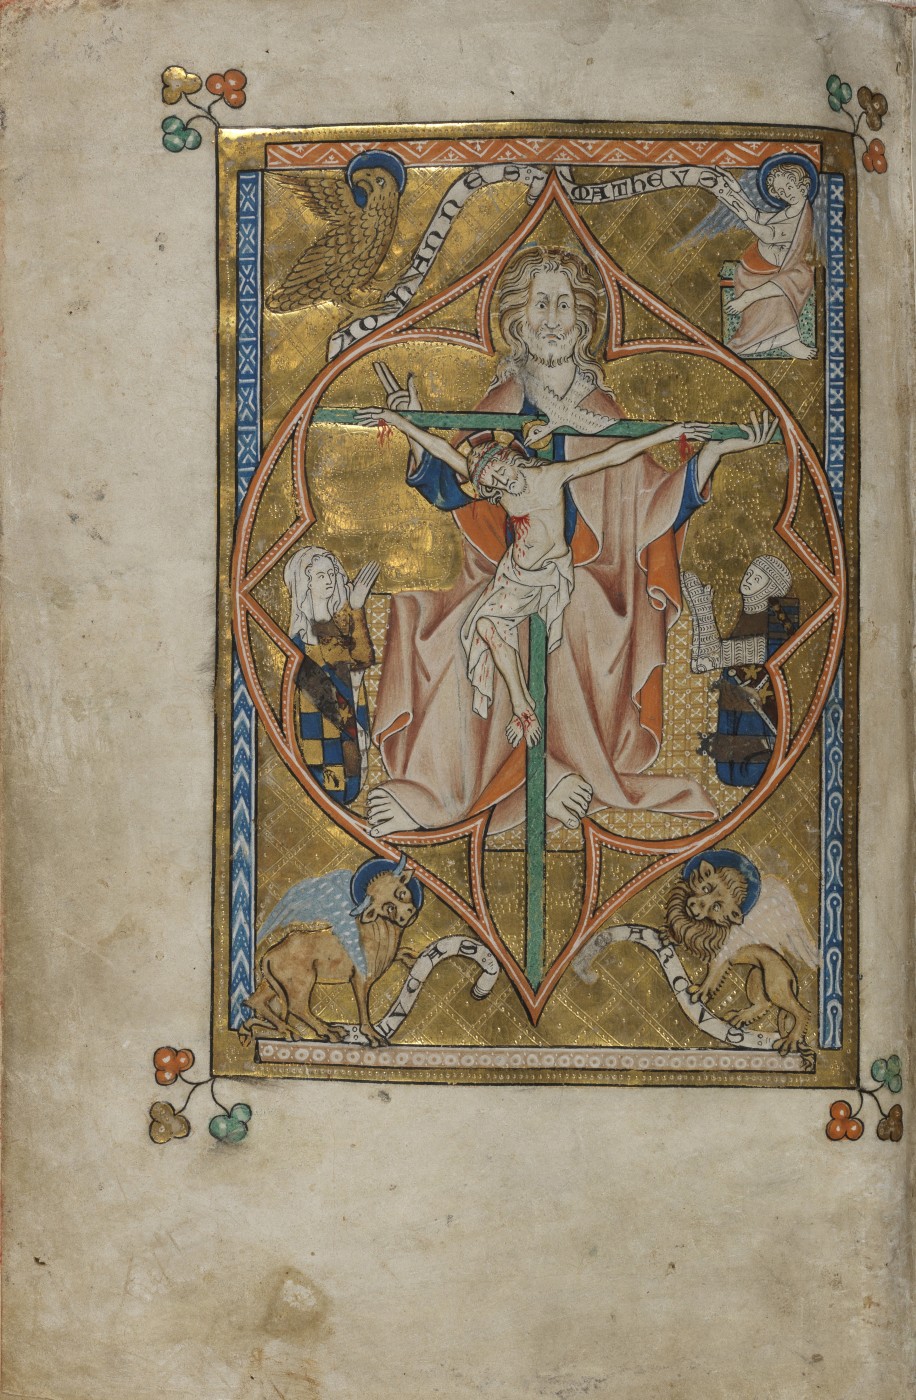 Featured image for the project: Illuminated Manuscripts